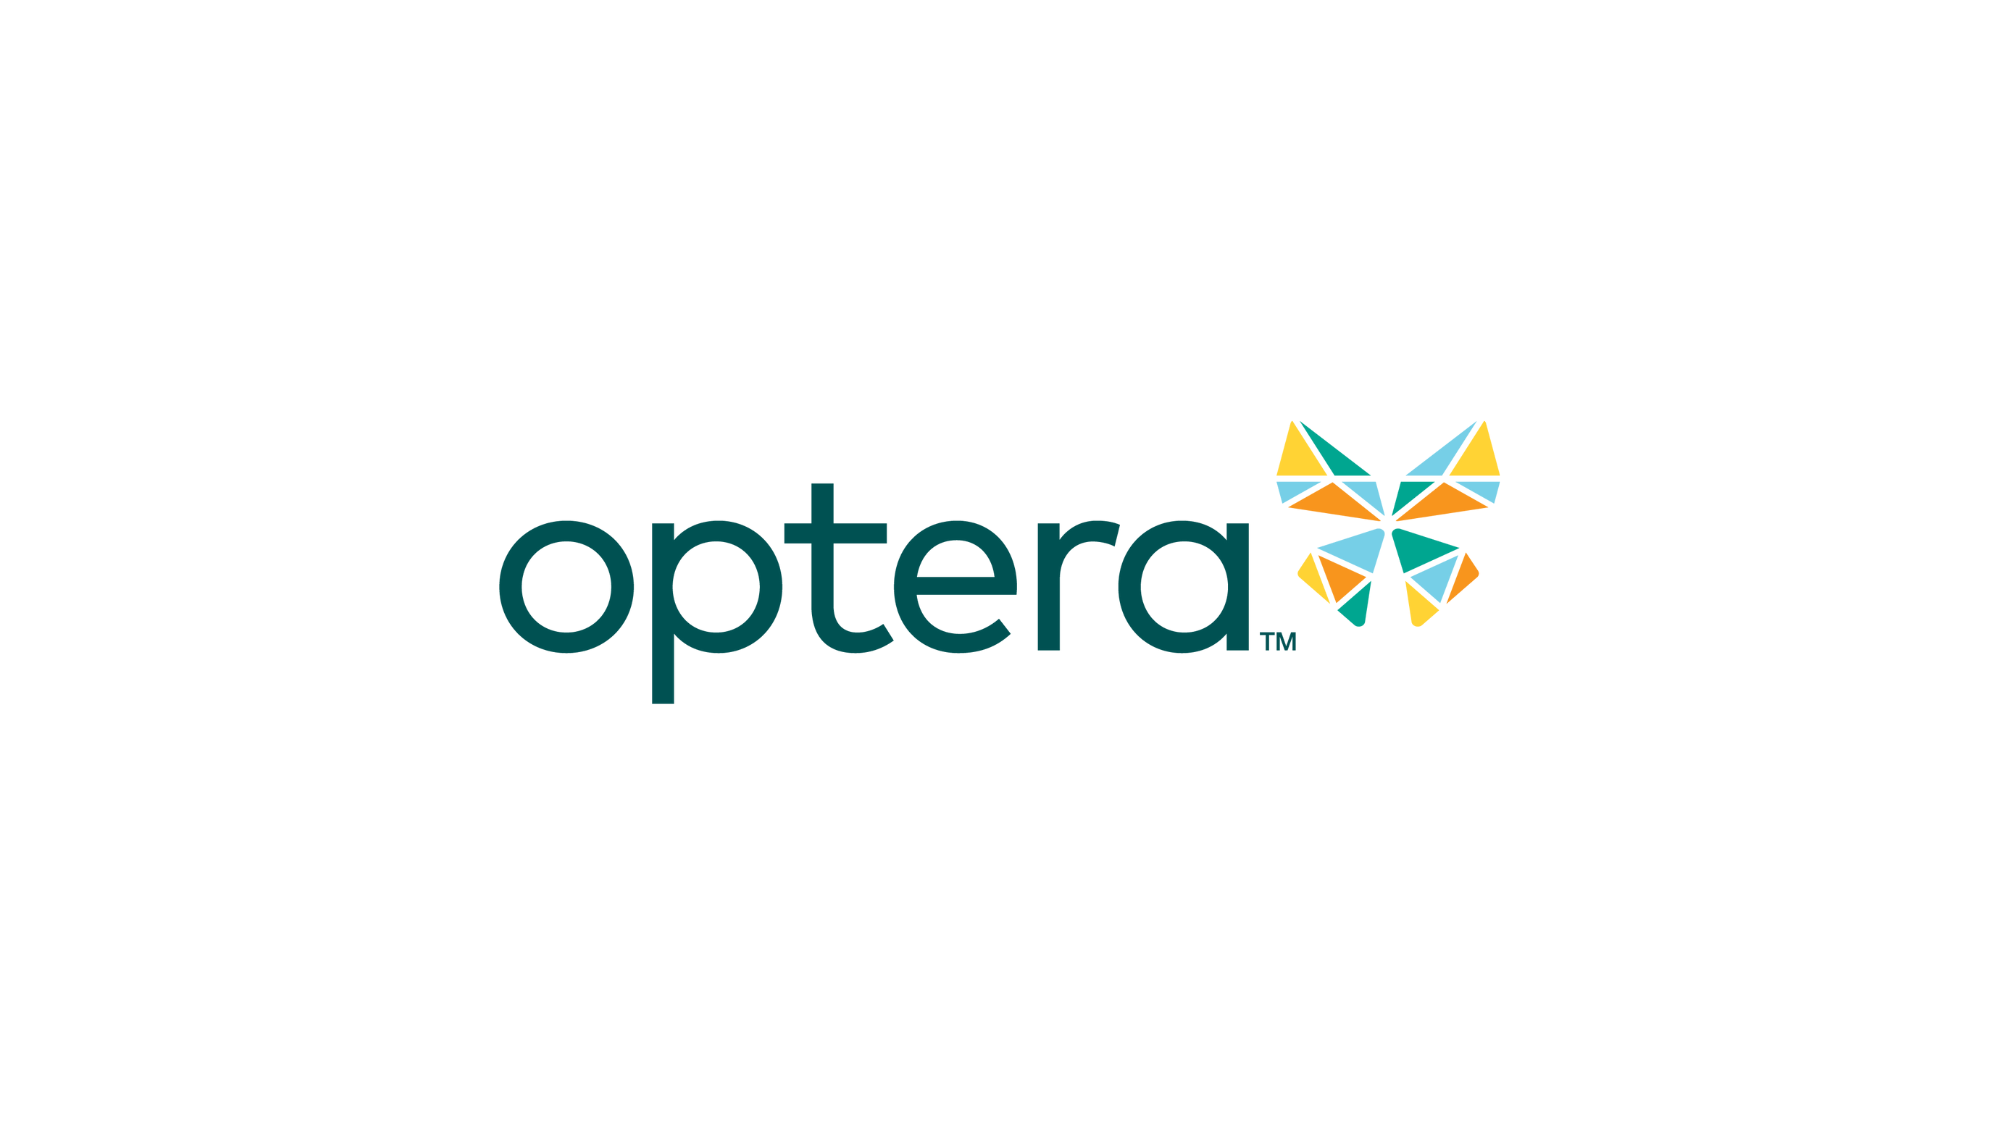 Logo features the text Optera followed by a multicolored butterfly icon in blue, green, orange, and yellow